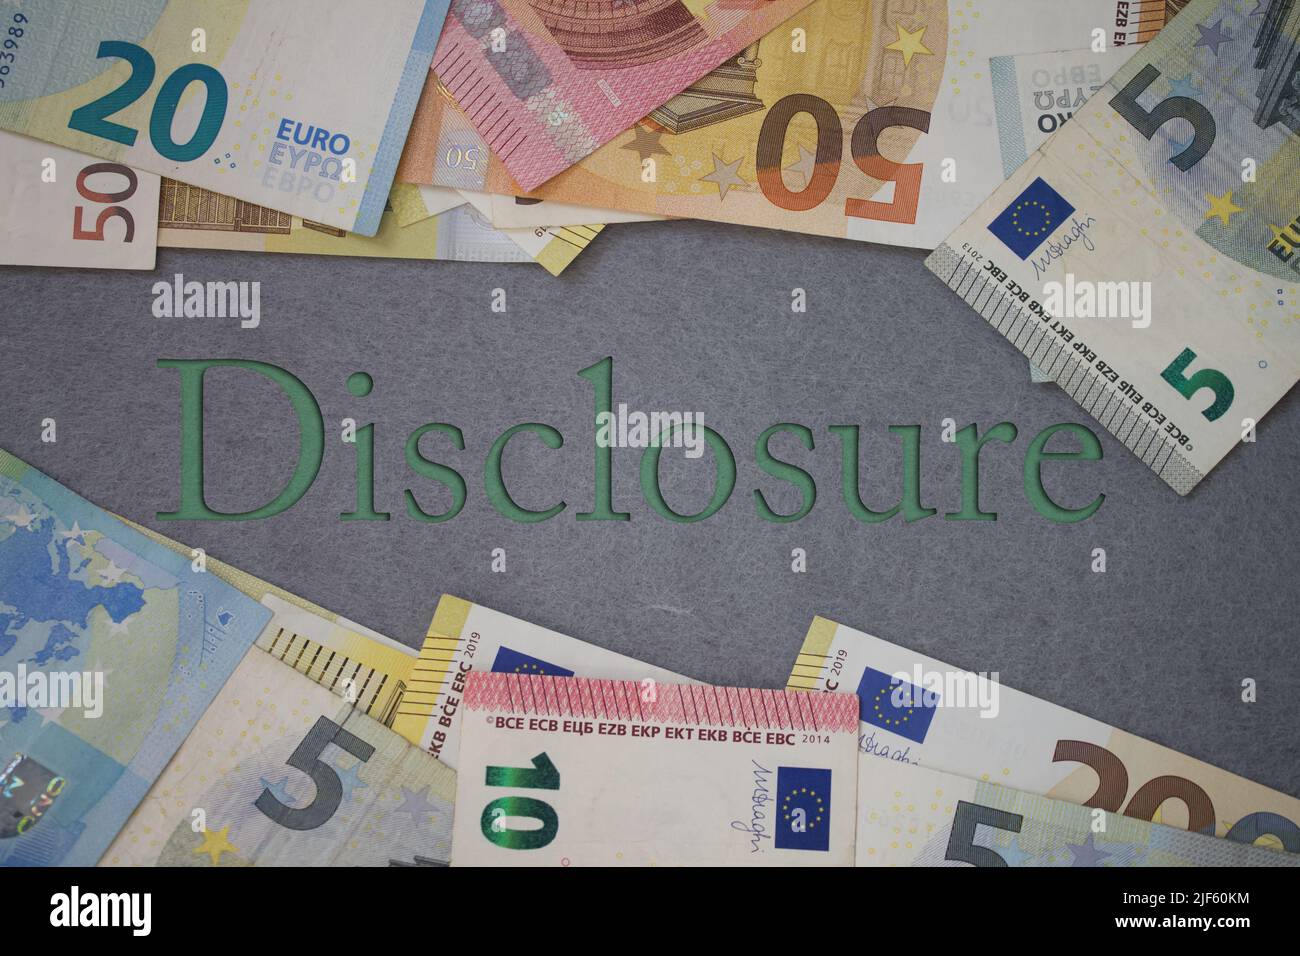 Disclosure word with money. Paper currency background with different banknotes. Stock Photo